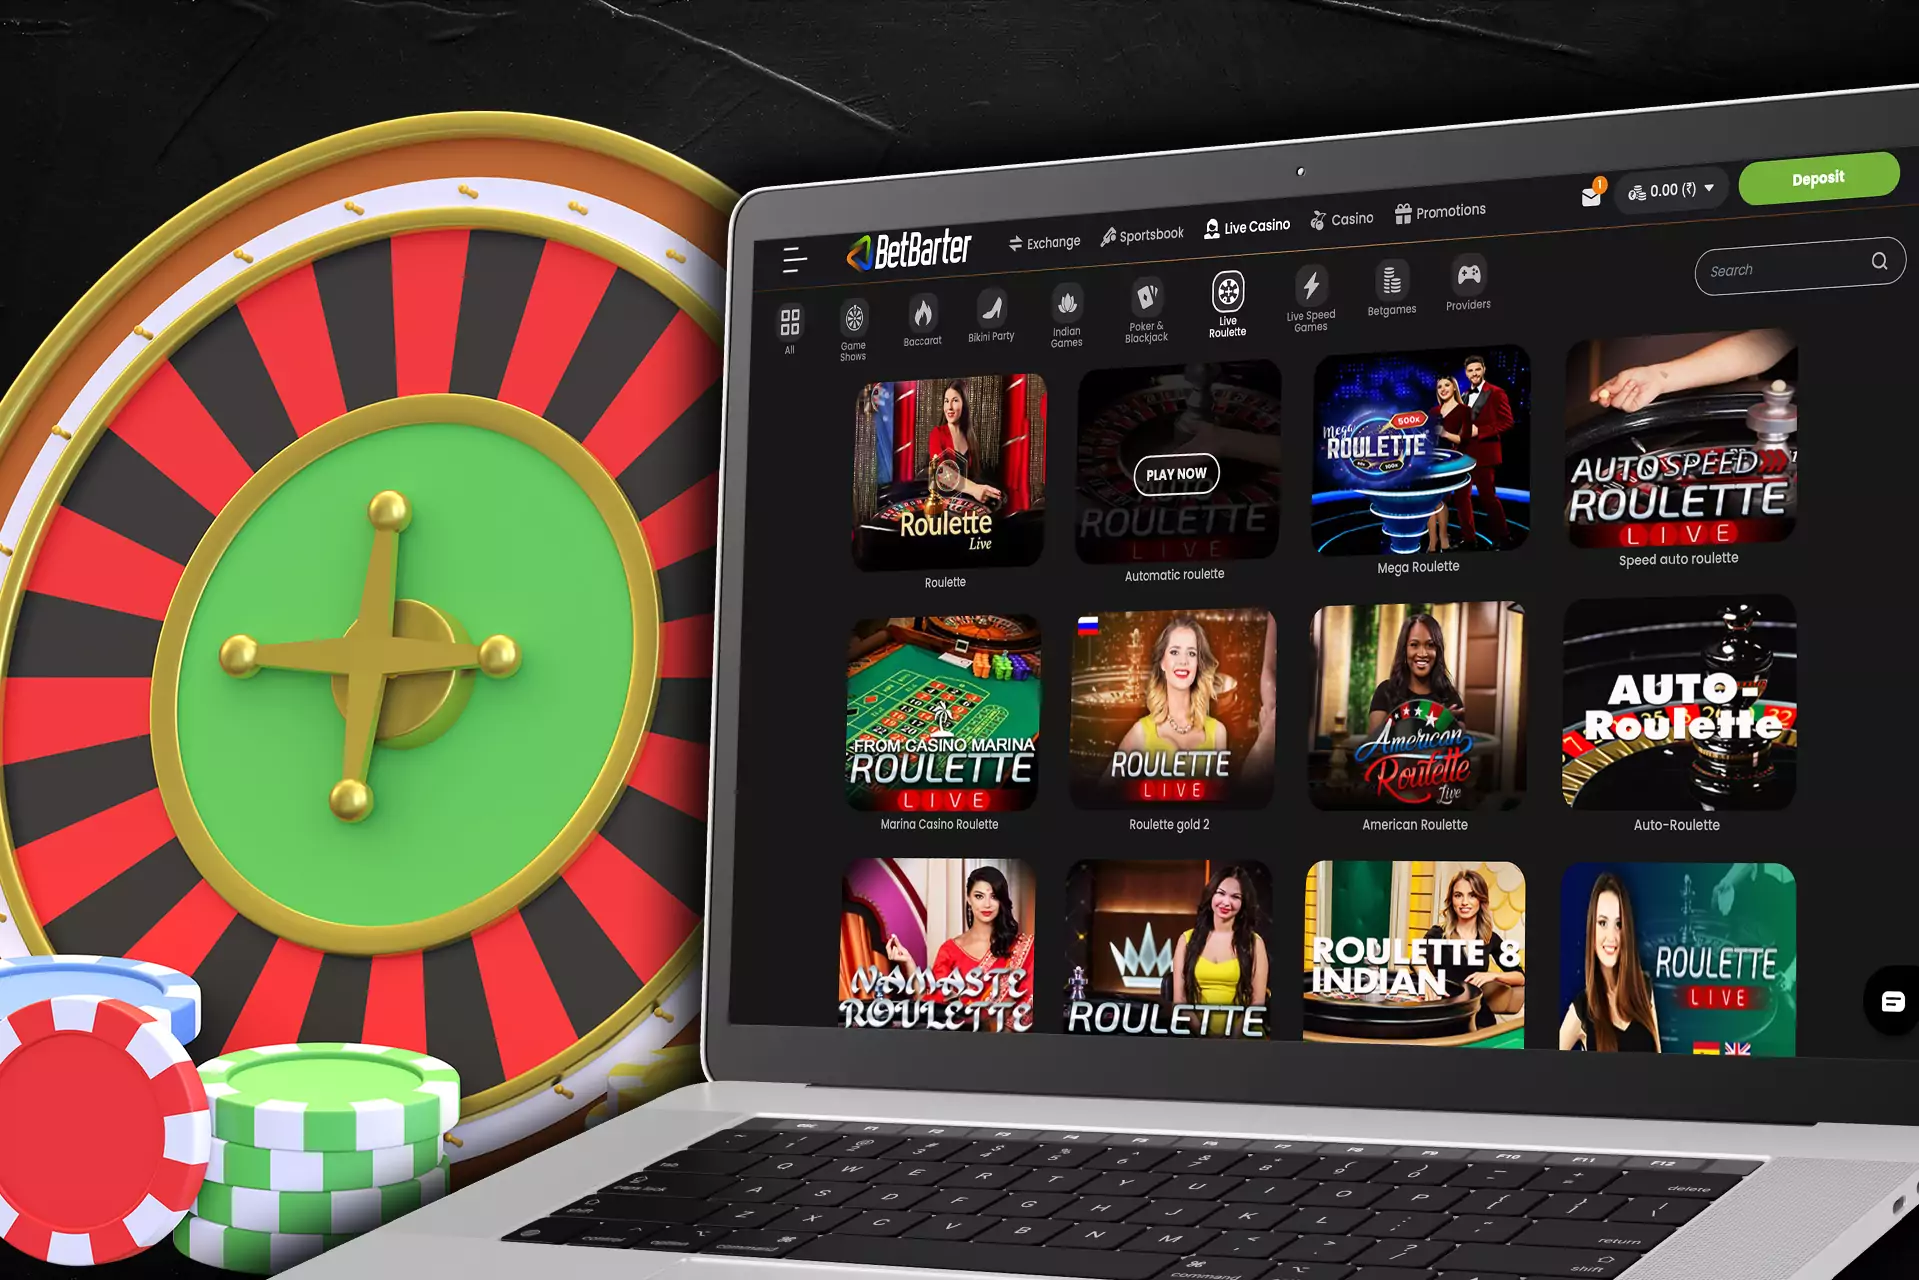 You can play online roulette in the Betbarter live casino.